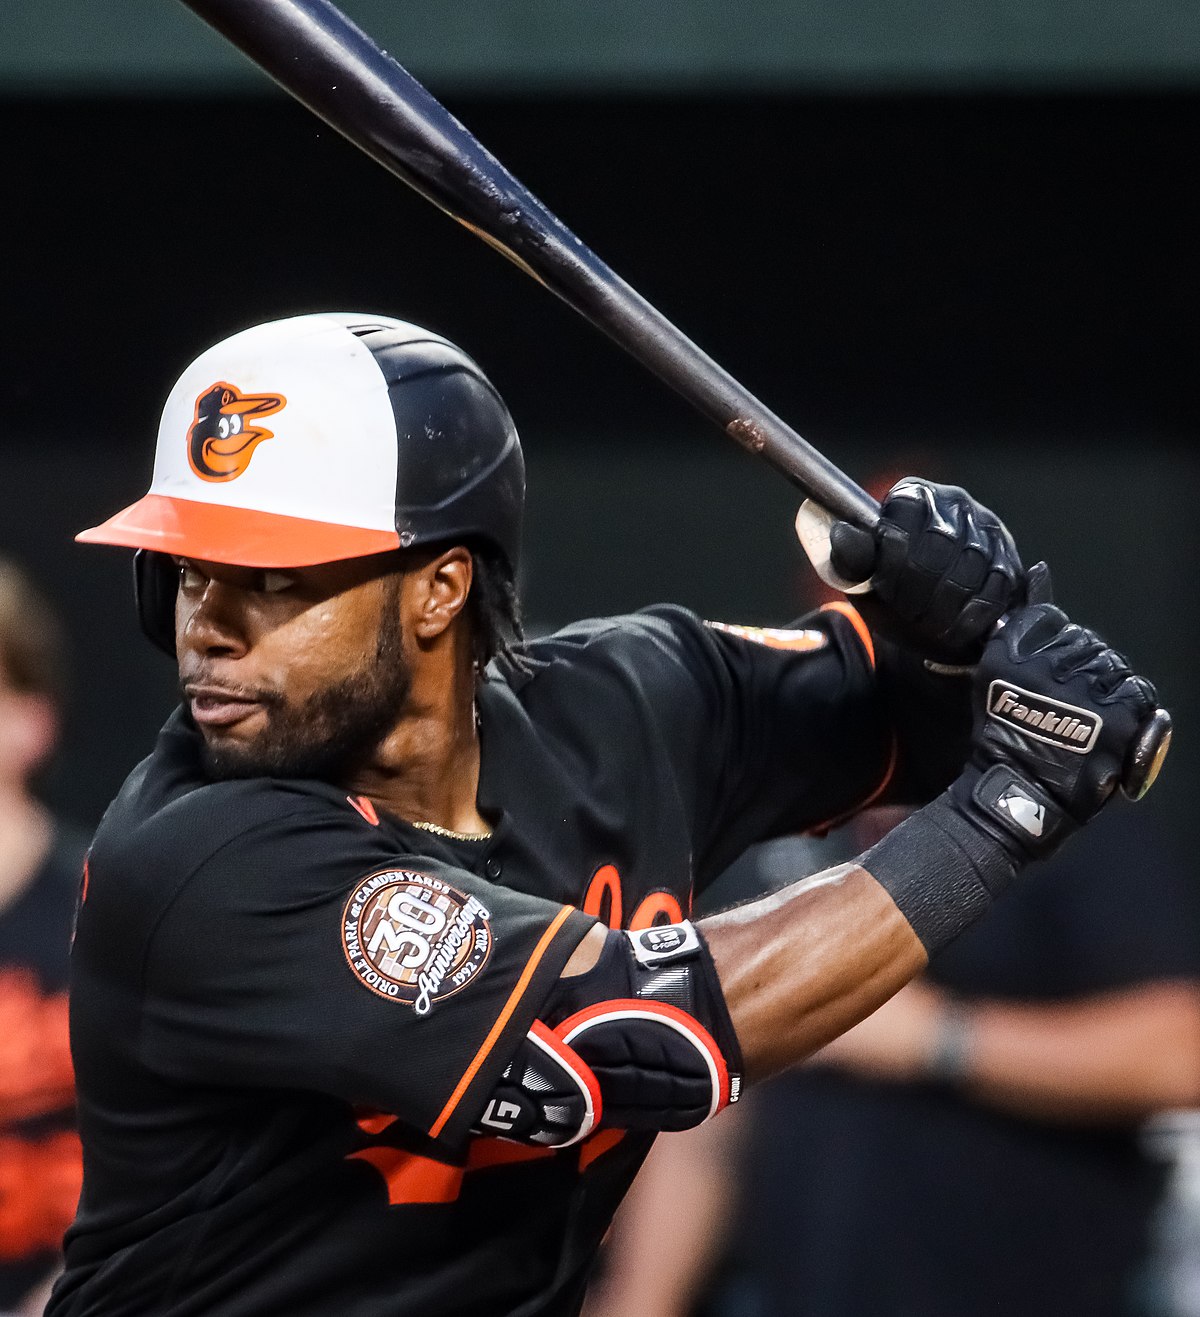 Cedric Mullins of the Baltimore Orioles bats against the Seattle